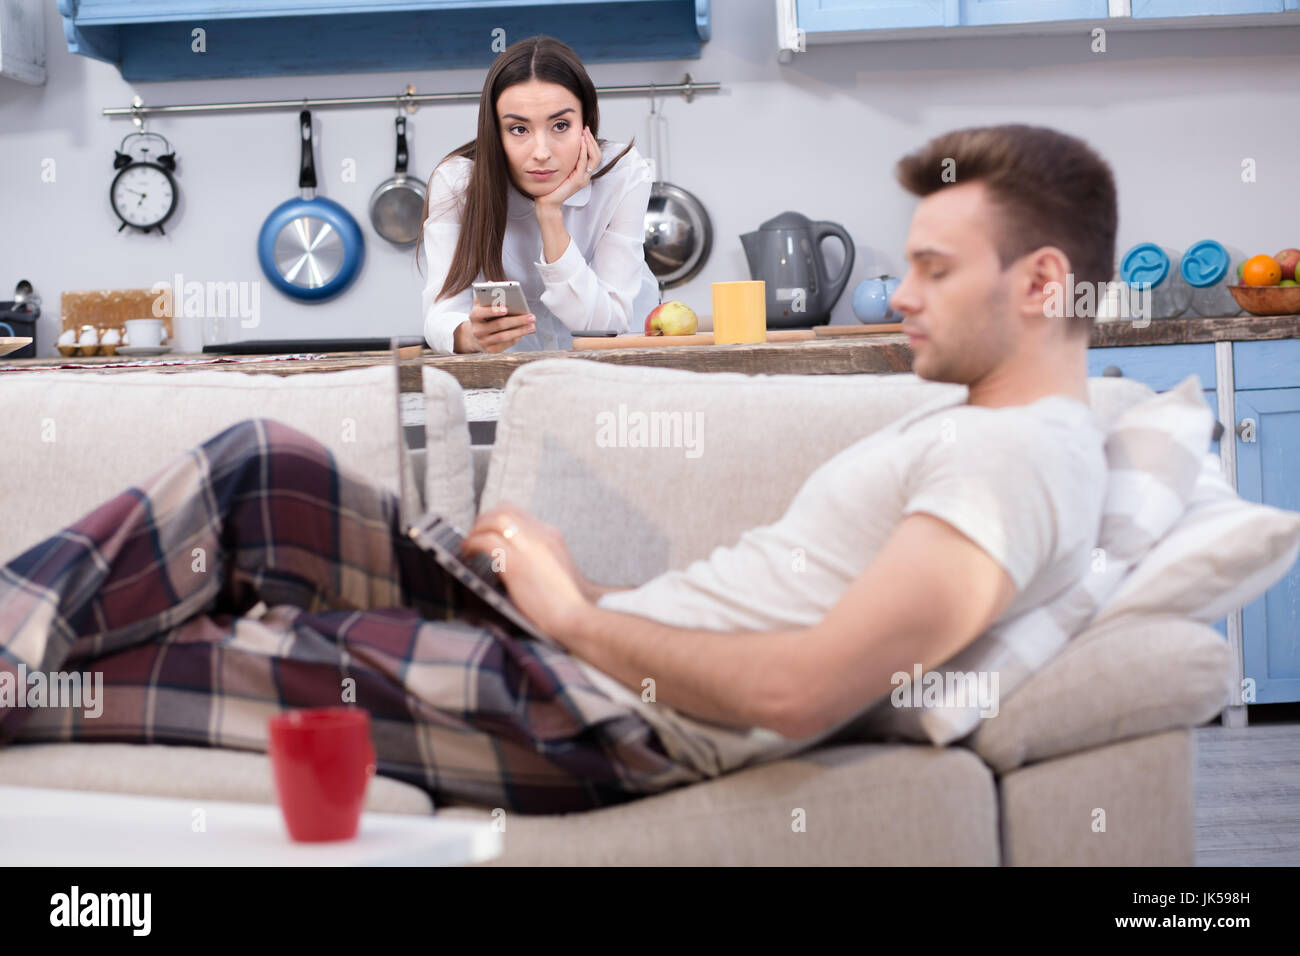 Working woman looking seriously on her lazy husband. Stock Photo